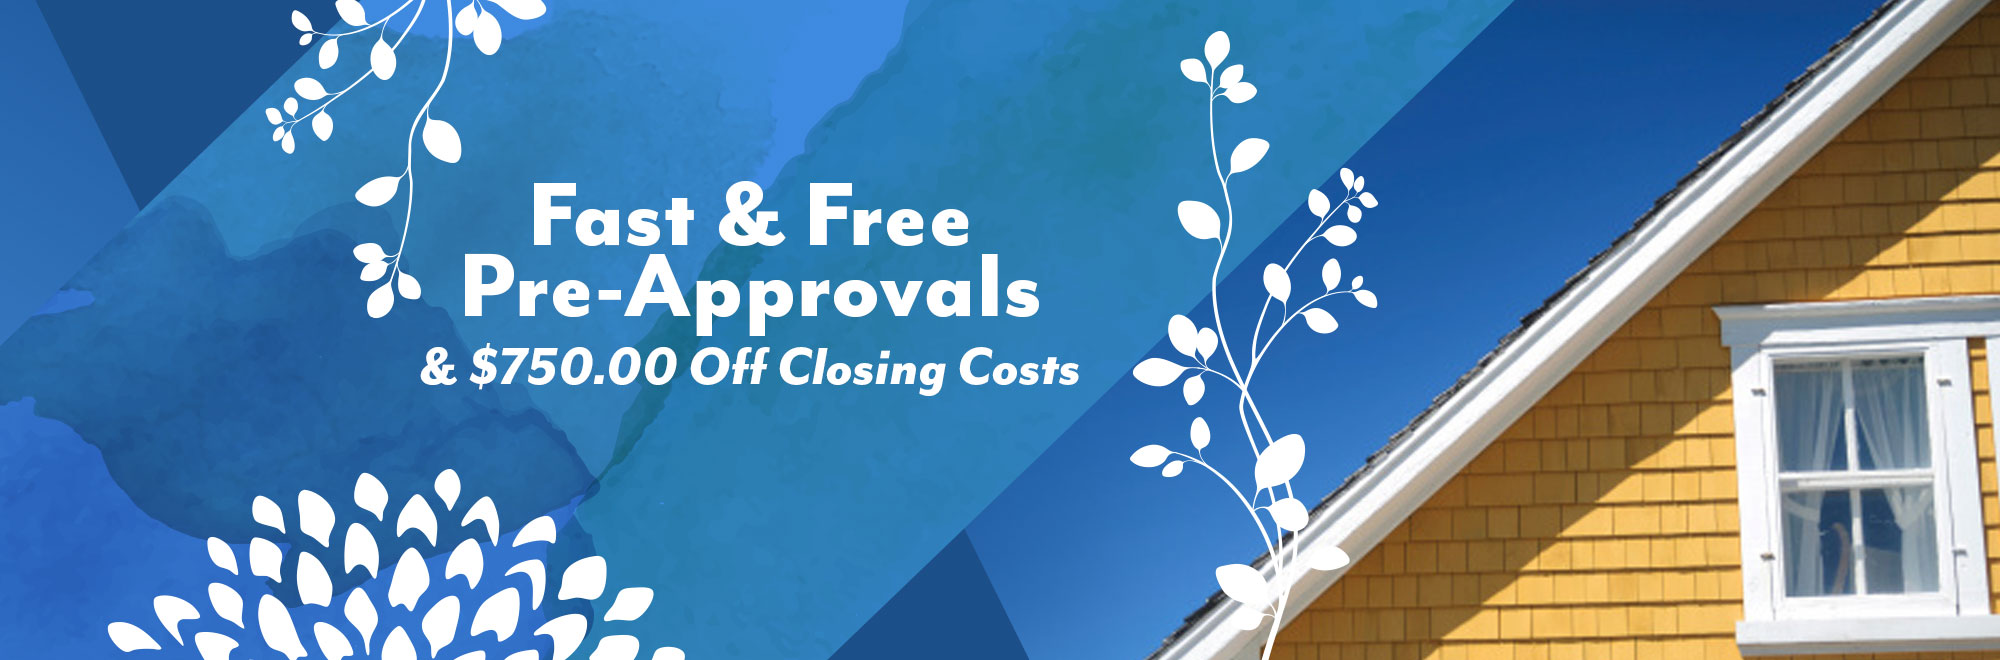 home loans 750 off closing costs